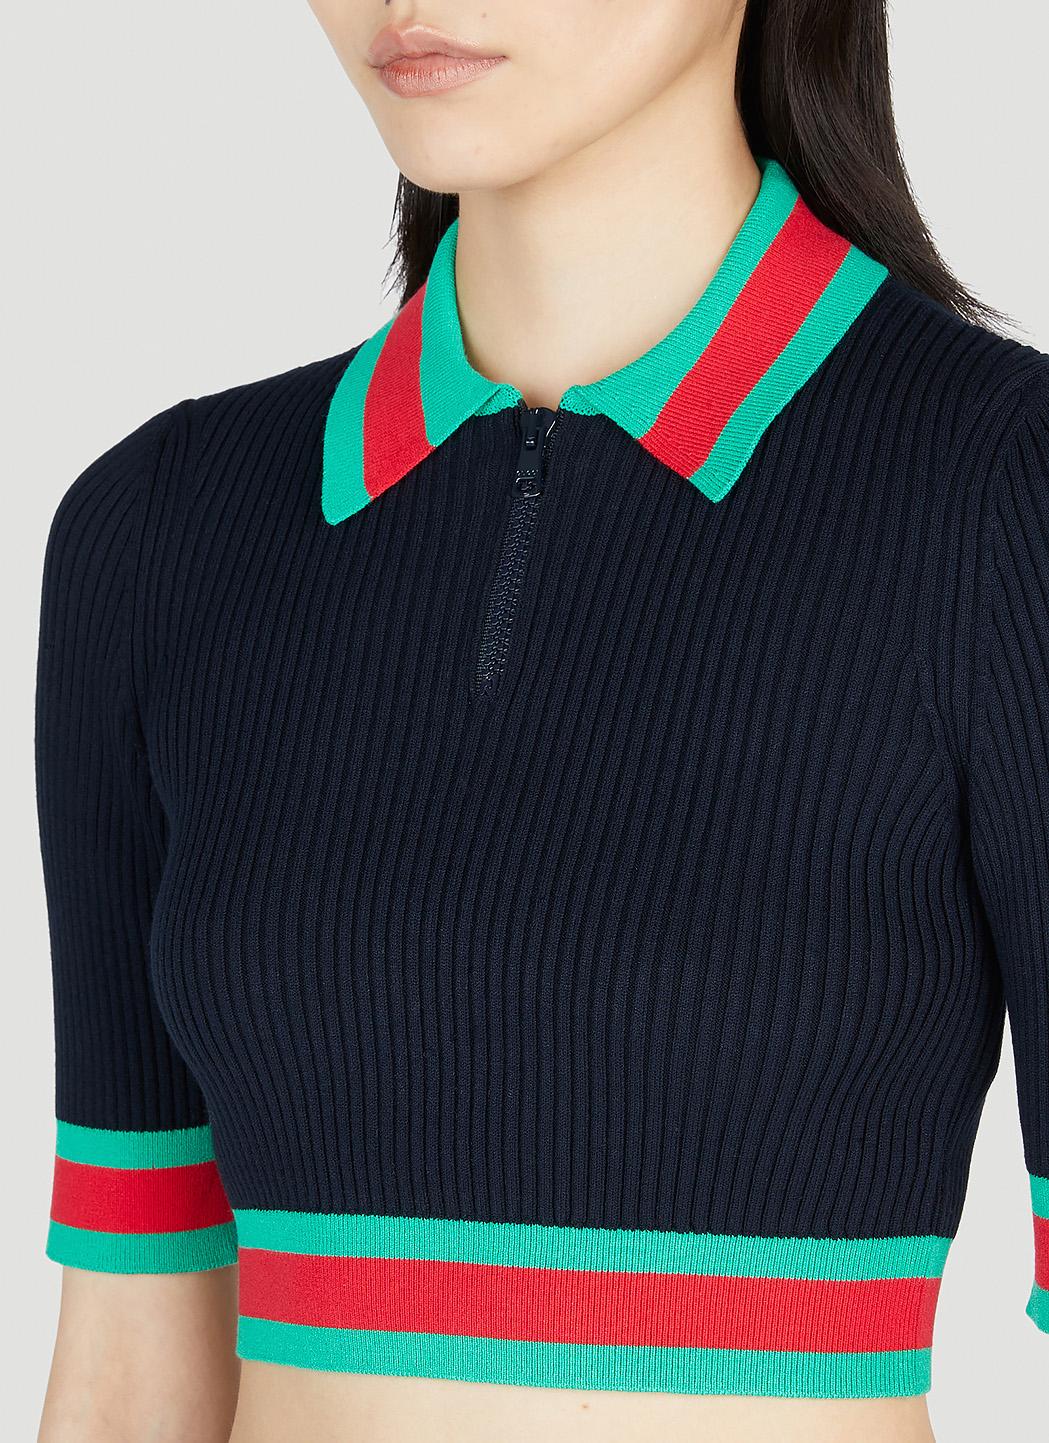 Gucci Unisex Cropped Polo Top in Black